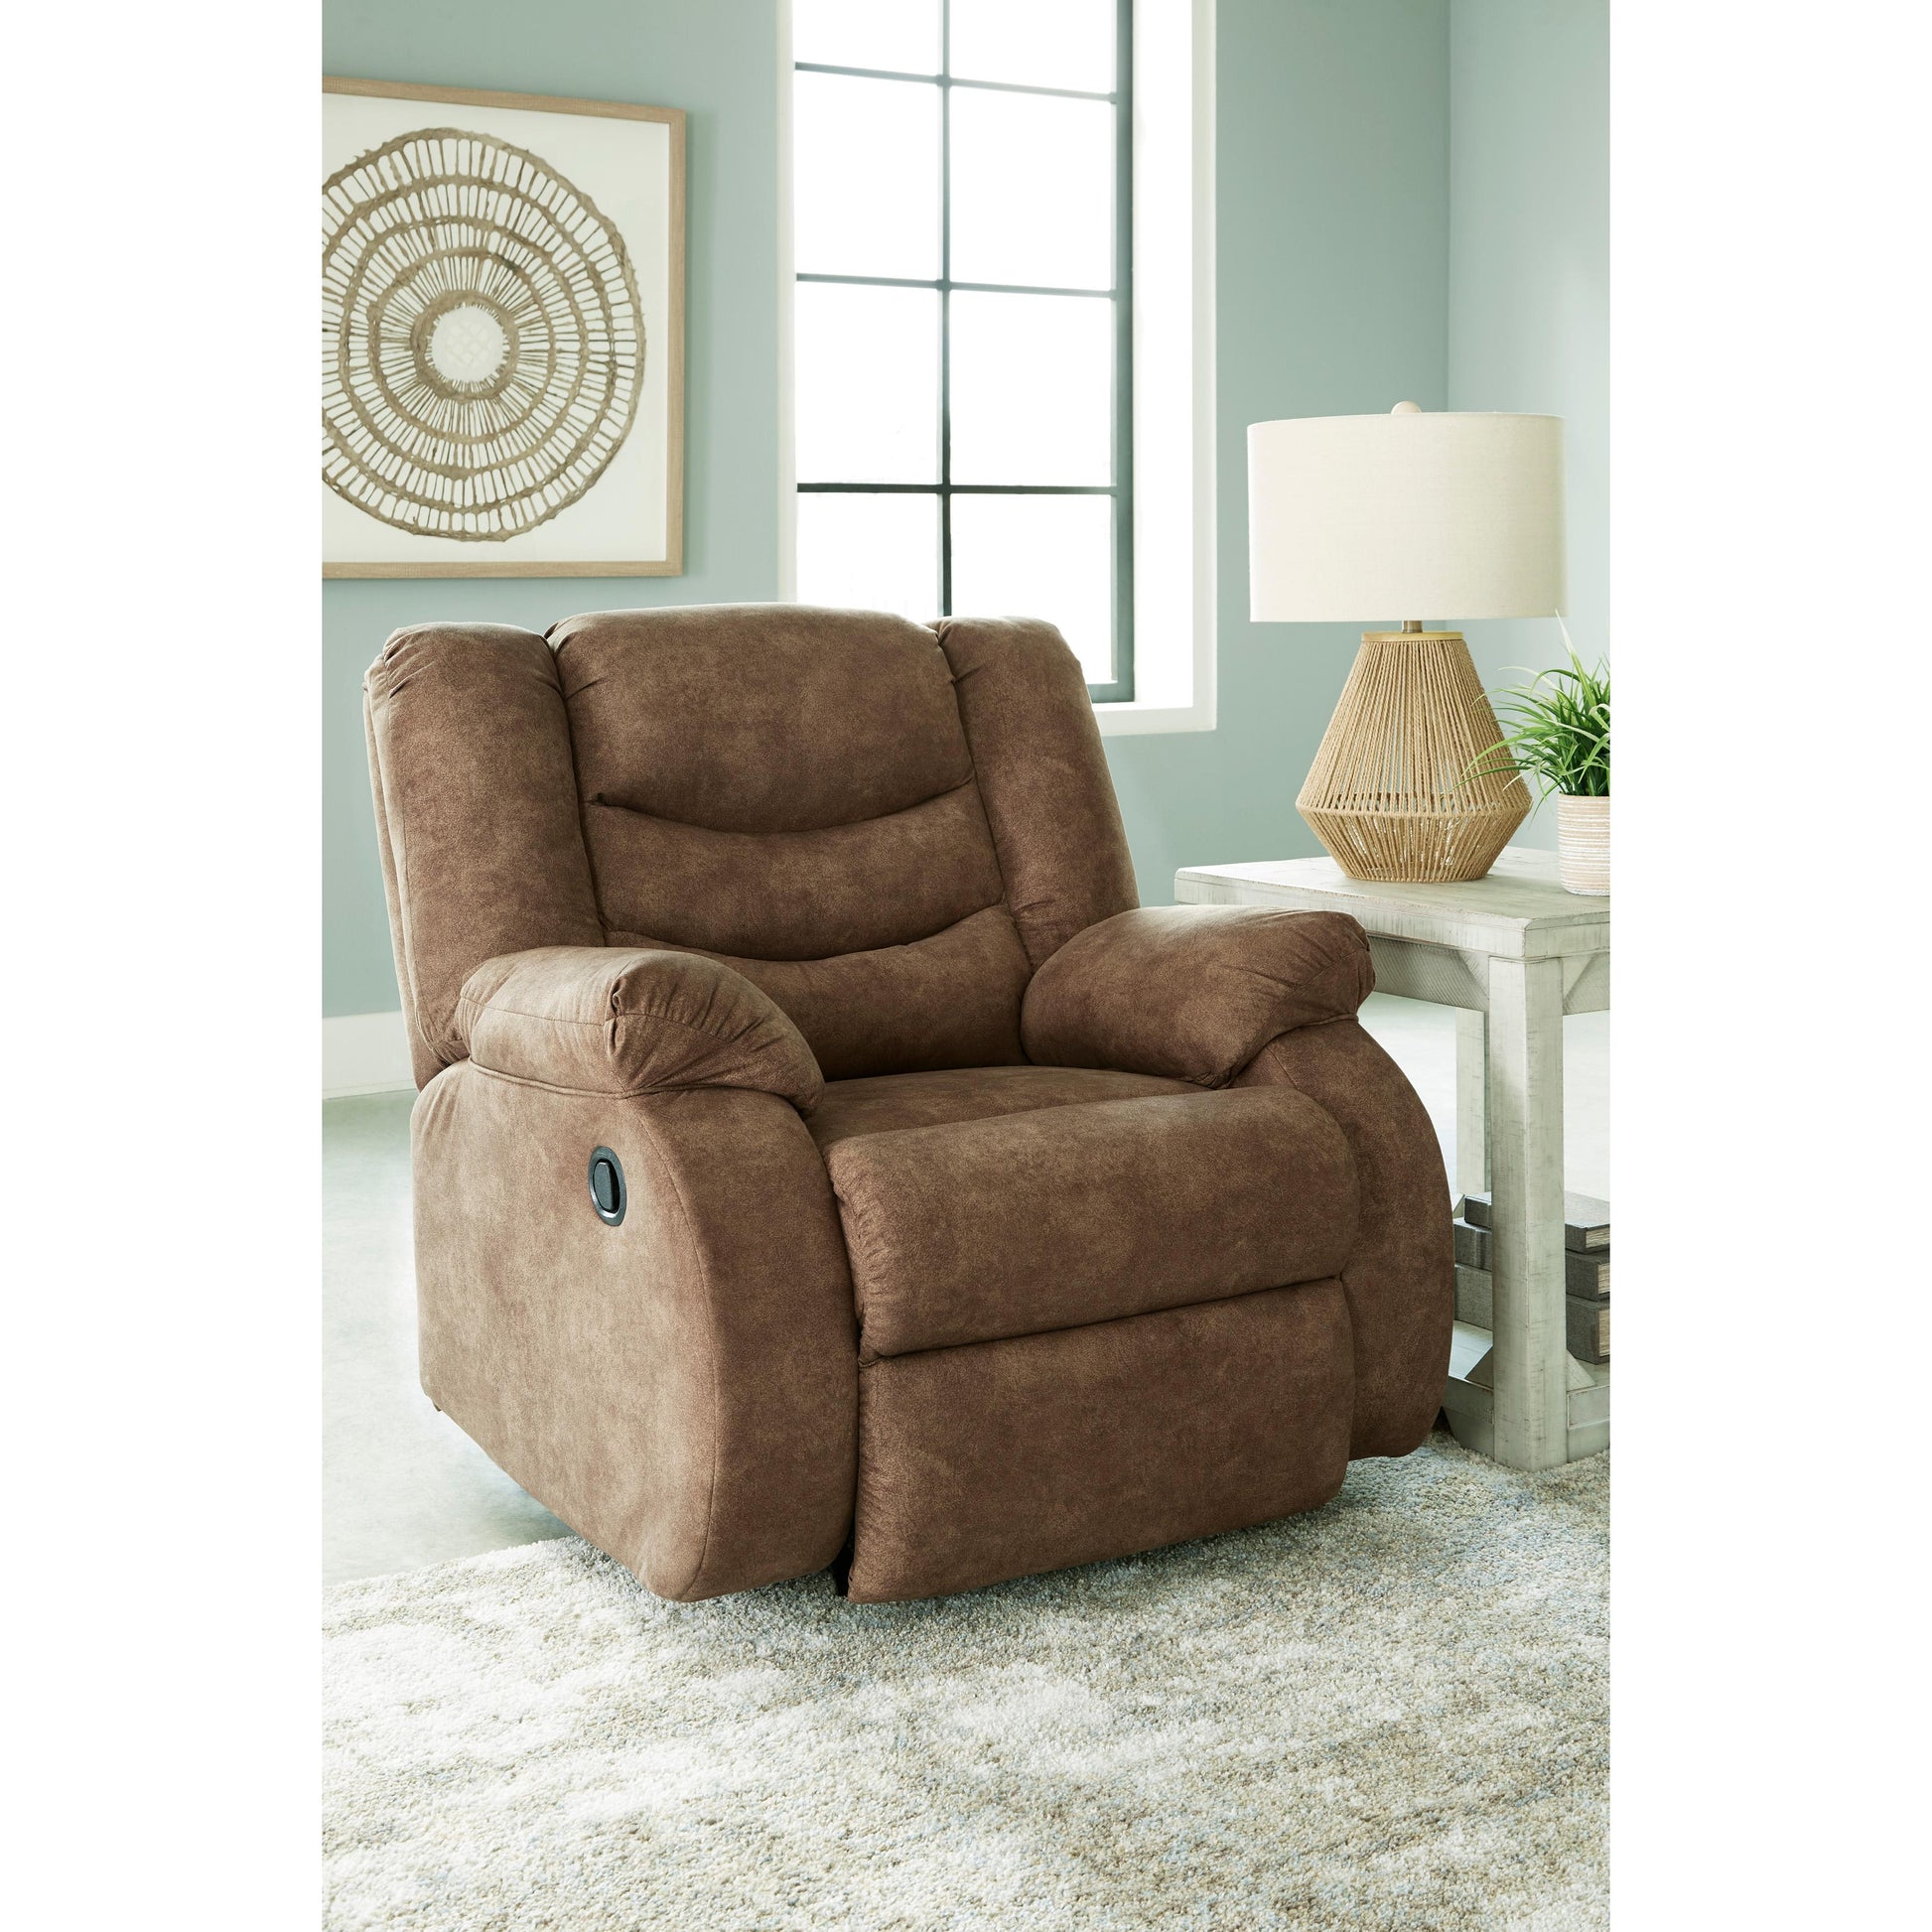 Signature Design by Ashley Partymate Rocker Leather Look Recliner 3690225 IMAGE 6